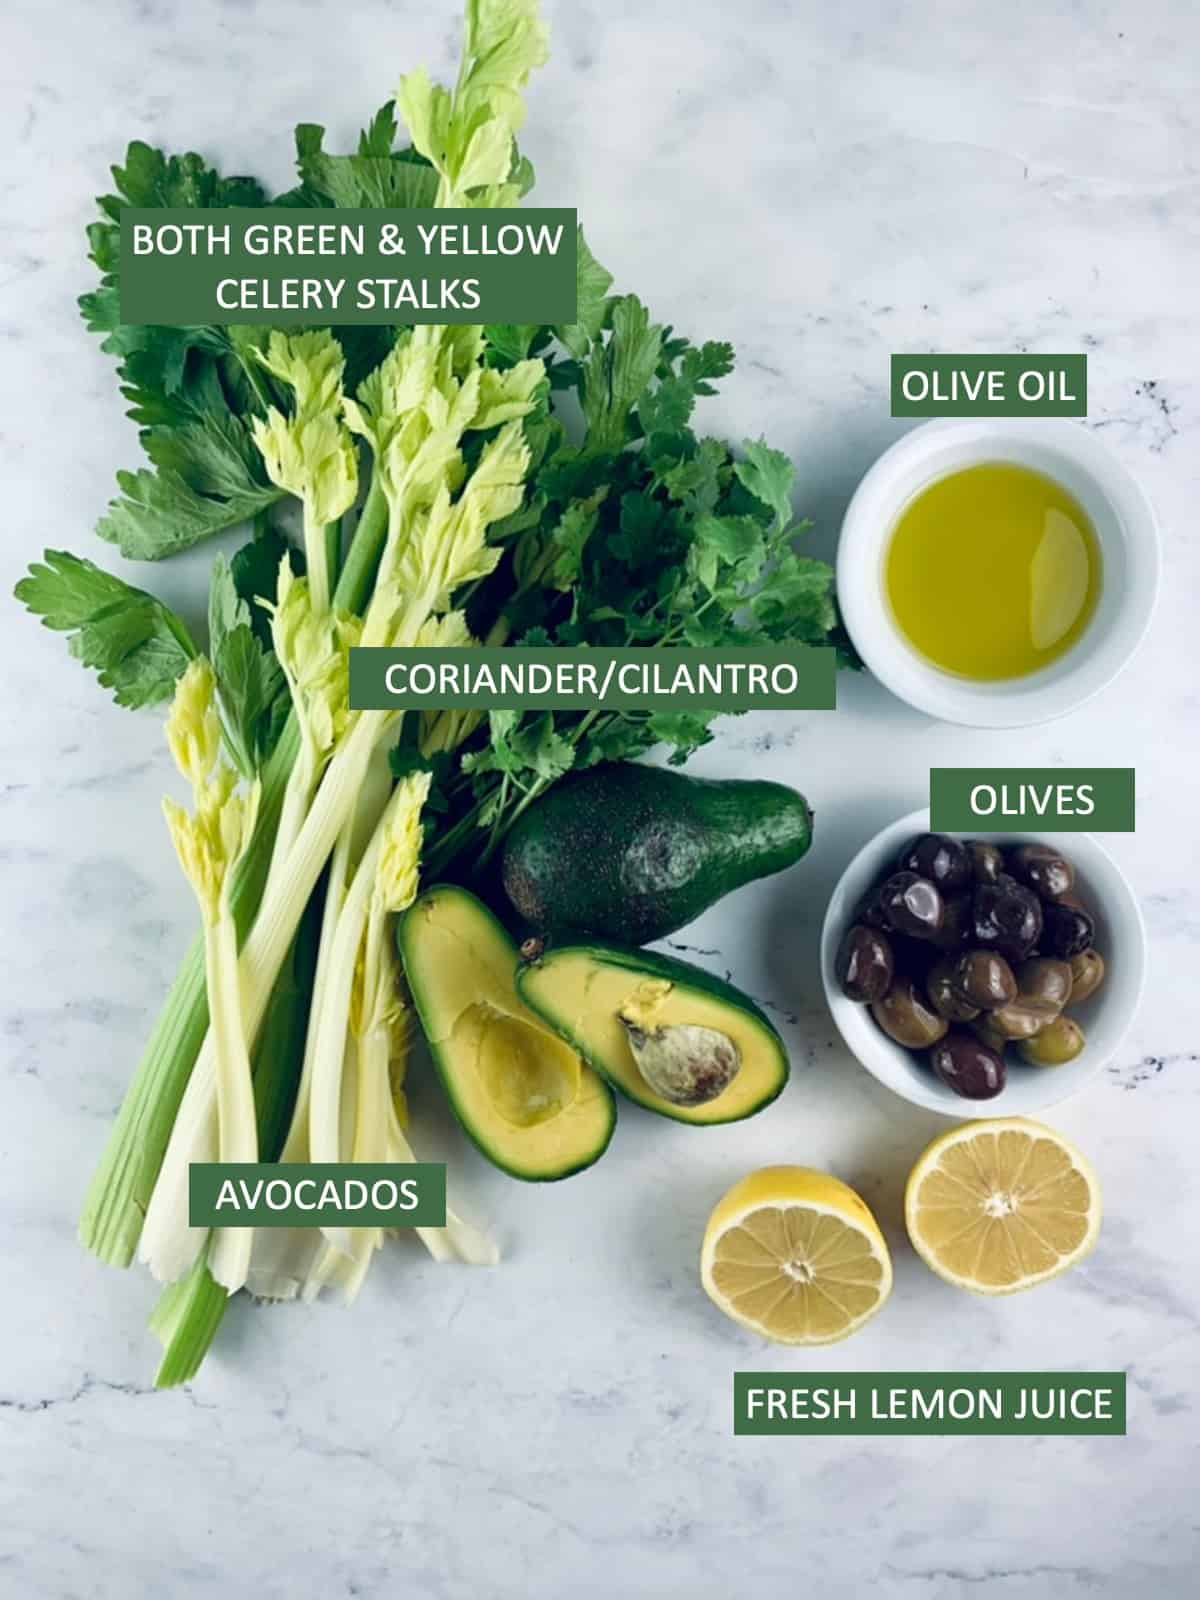 Labelled ingredients needed to make Chilean celery avocado salad.